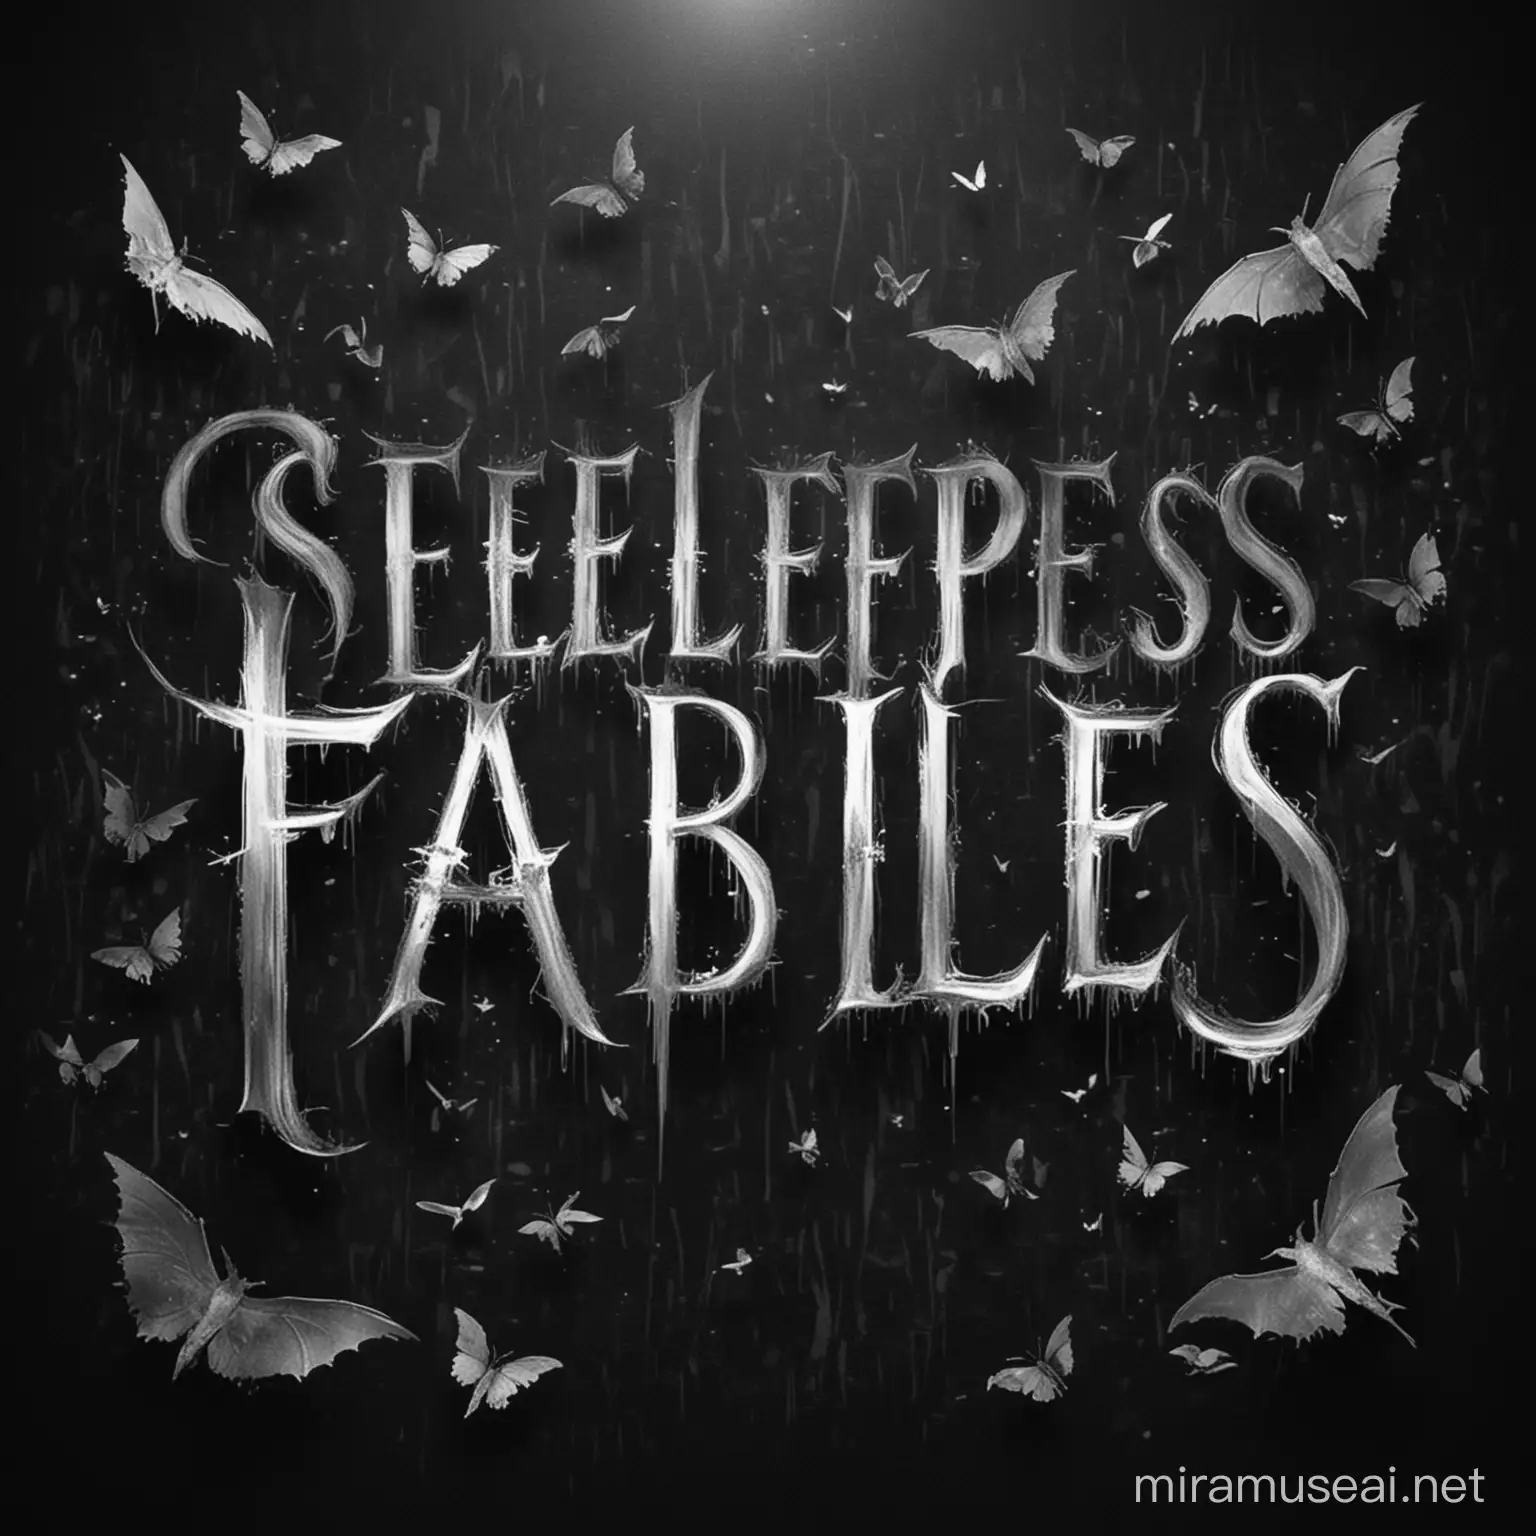 Black-dark-gray background with white-light-gray inscription "Sleepless Fables" in horror and scary style of words.